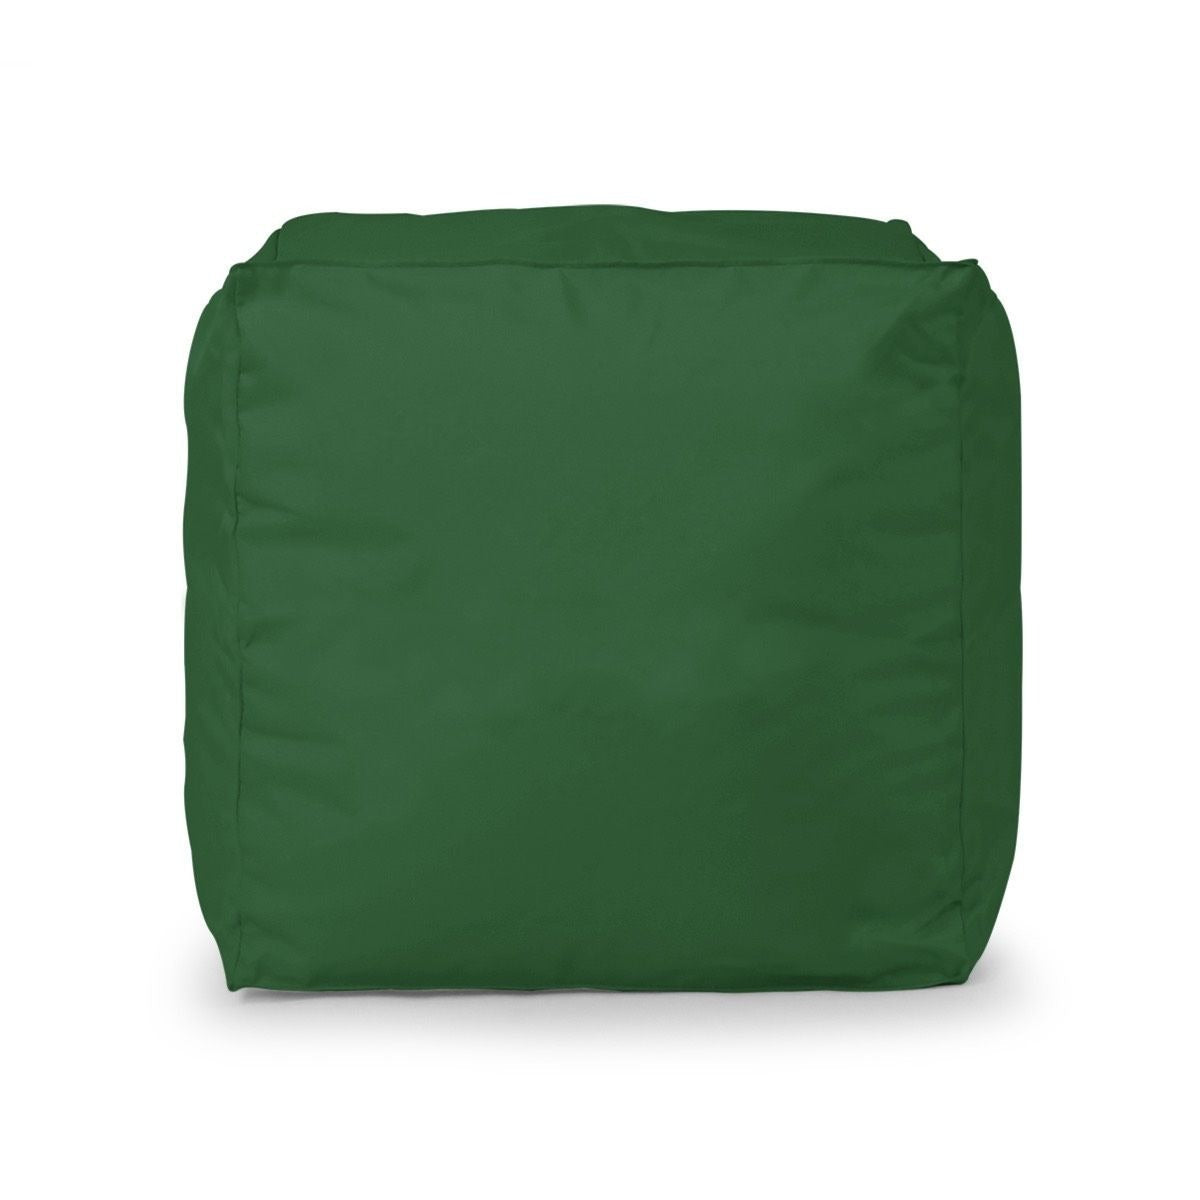 Primary Cube Bean Bag, Sturdy, stackable and indispensable! These Classroom Cube Bean Bags are a colourful accessory for extra seating, group work, break out areas, common rooms, libraries, or even as classroom display props - the list is endless! Lightweight and easily manoeuvrable for primary or secondary school students. Water Resistant Perfect for quiet areas and reading corners, our bean bags are great for creating a comfortable and fun environment. The Primary cube bean bag measures 45cm x 45cm x 45cm